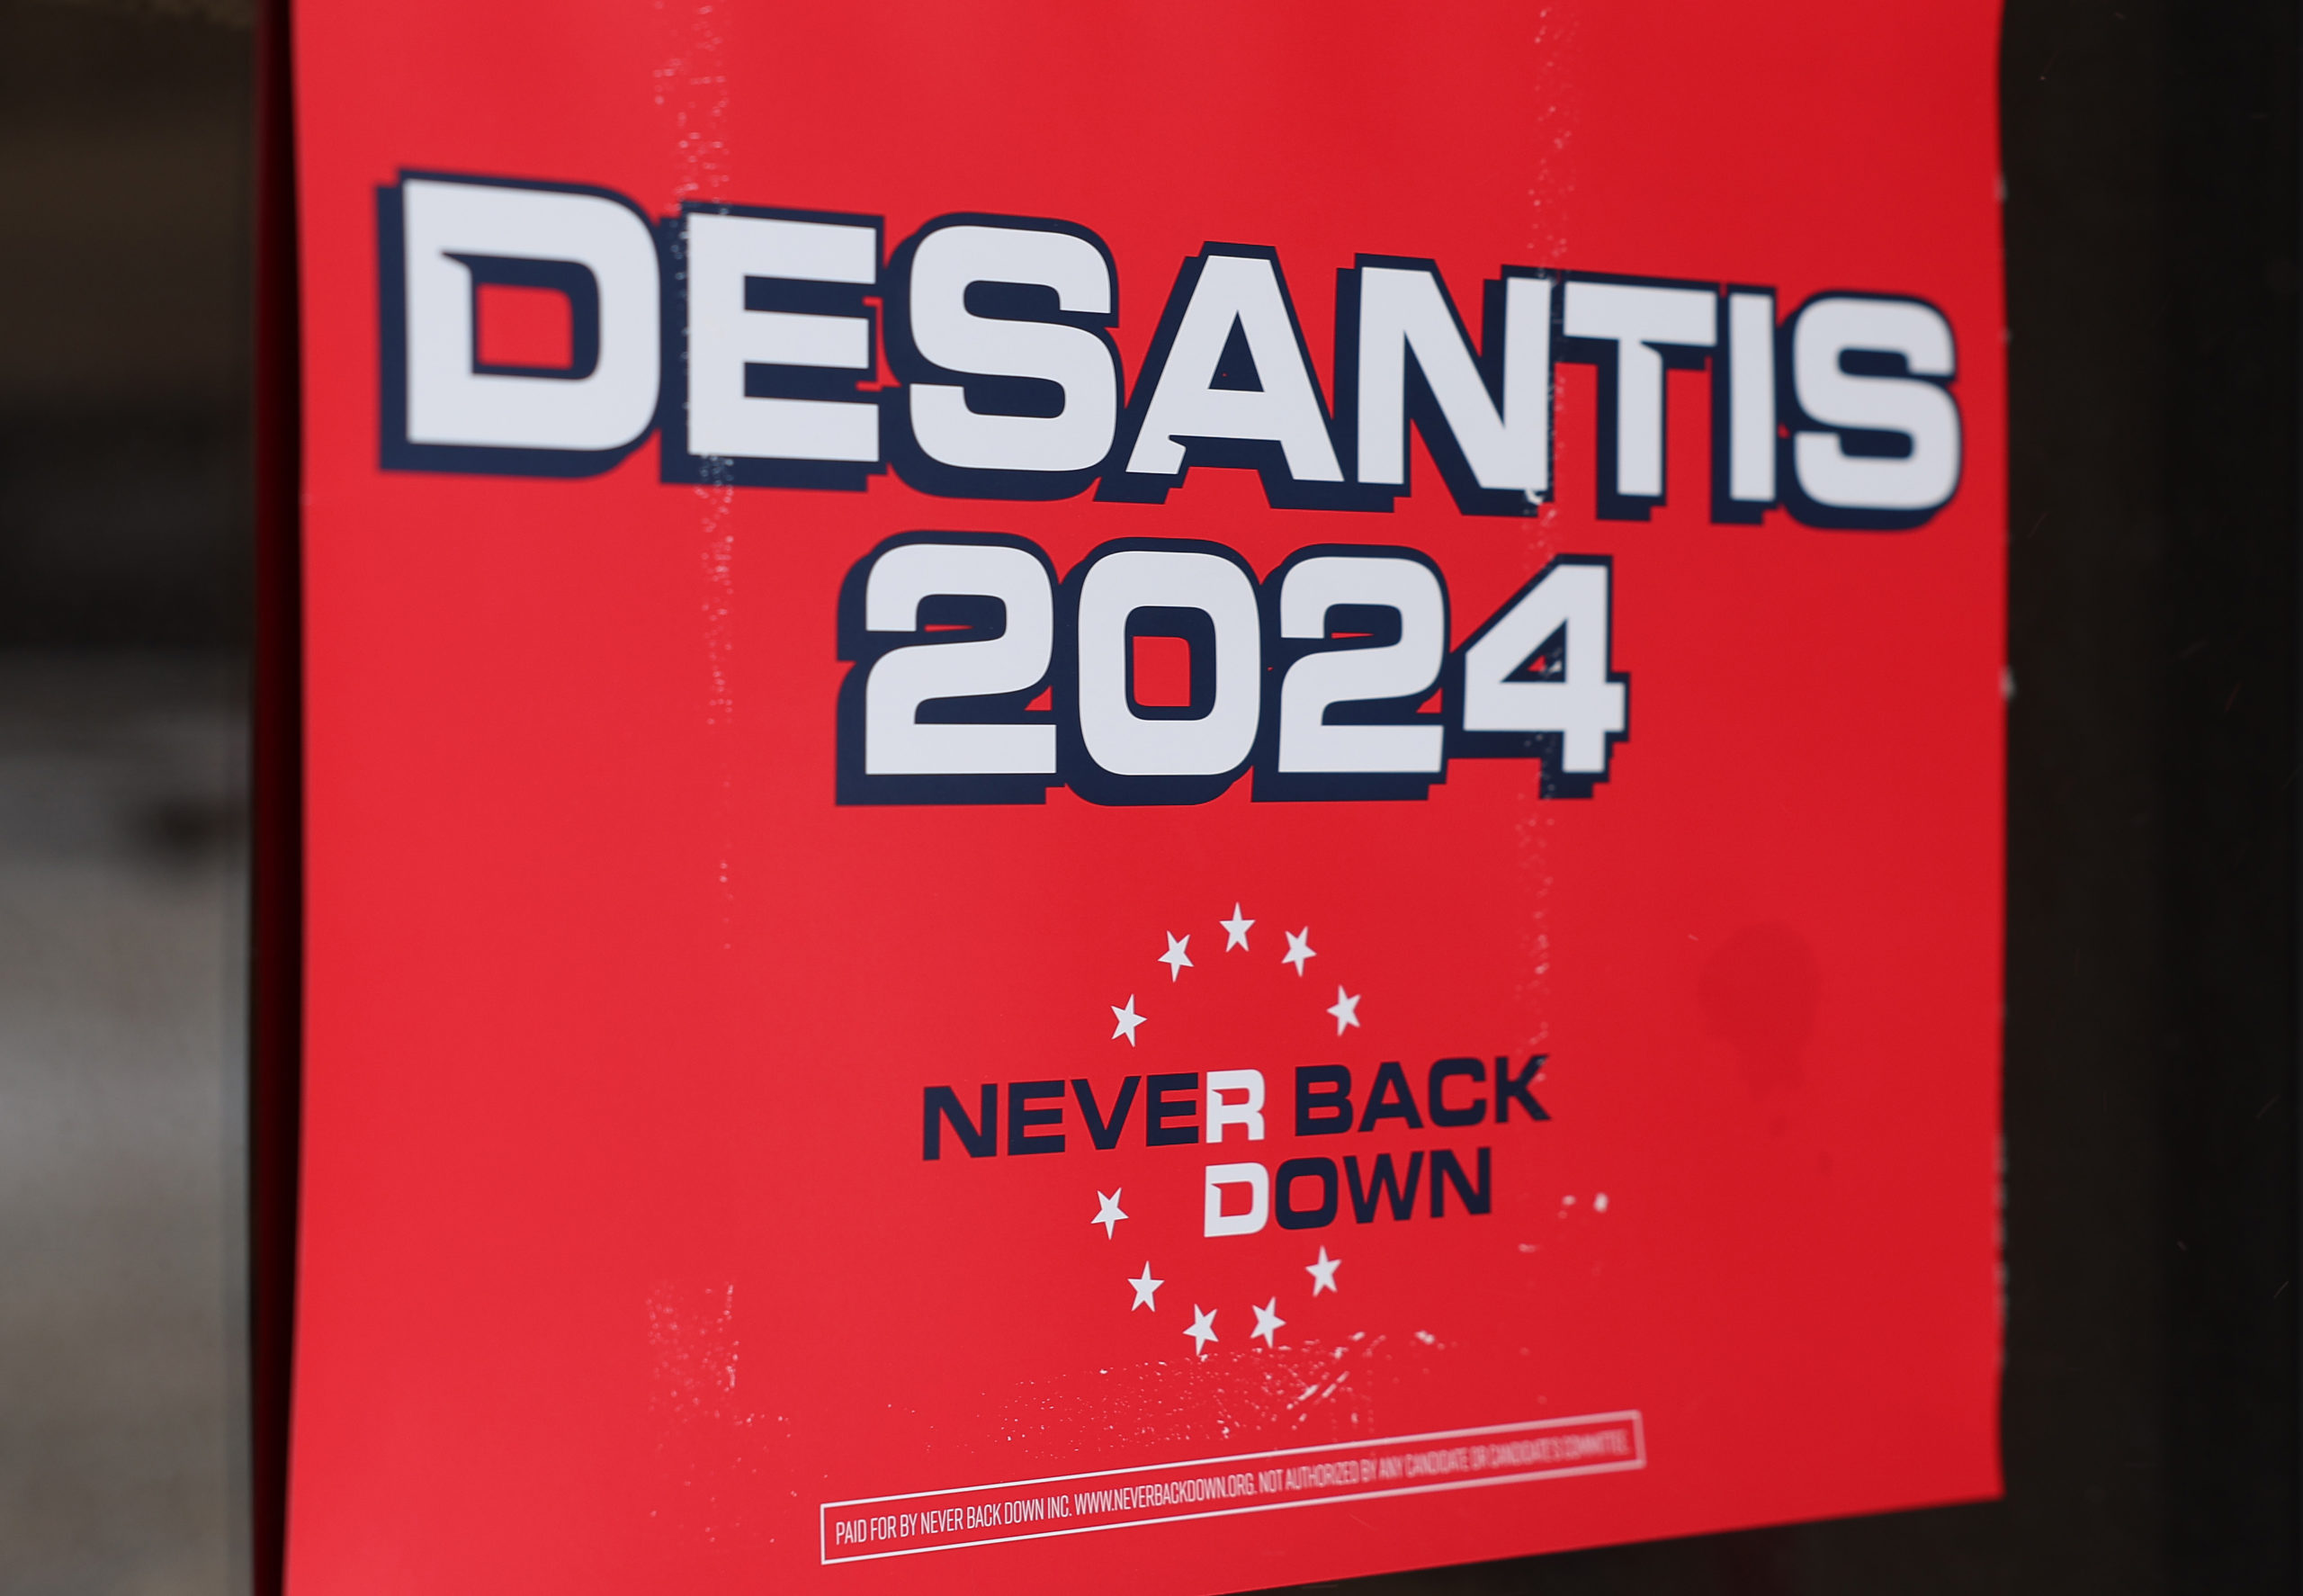 SIOUX CITY, IOWA - JANUARY 12: Signs are seen on the local campaign headquarters for Republican presidential candidate Ron DeSantis as heavy snow continues to fall on January 12, 2024 in Sioux City, Iowa. The second winter weather system in a week is bringing blizzard conditions across Iowa as voters prepare for the Republican Party of Iowa's presidential caucuses on January 15th. (Photo by Kevin Dietsch/Getty Images)